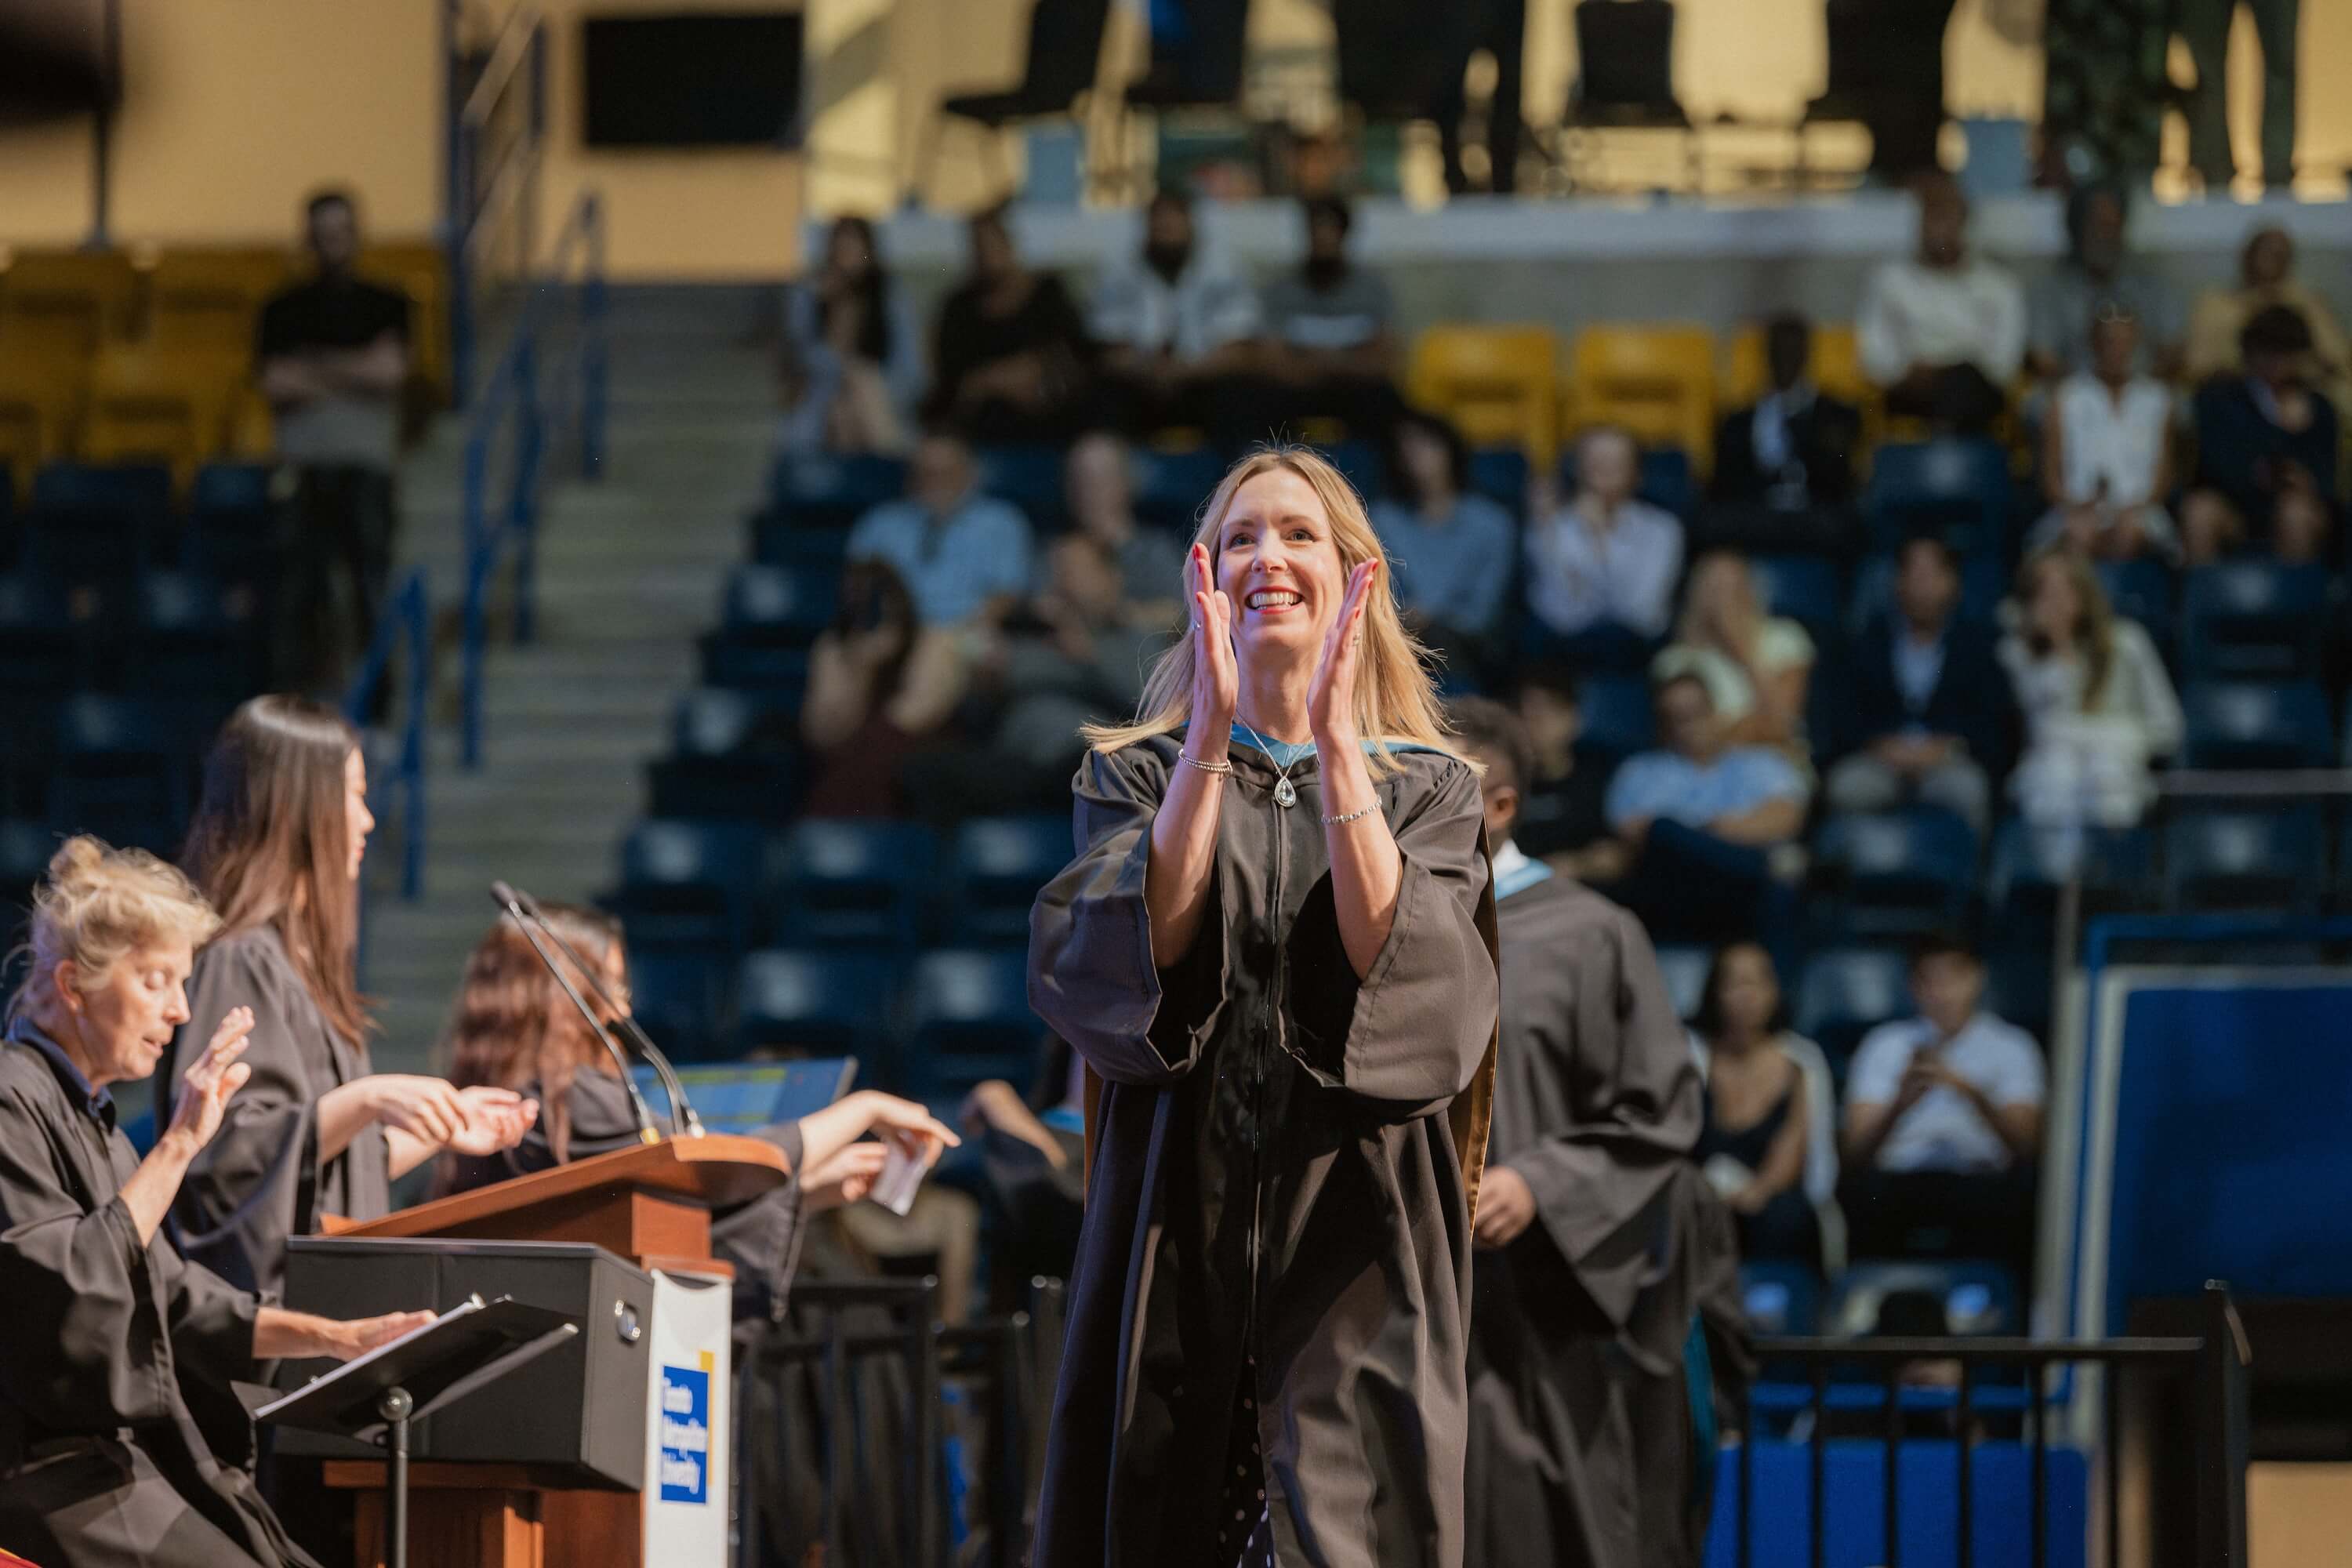 A woman clapping as she walks across a stage at Convocation.